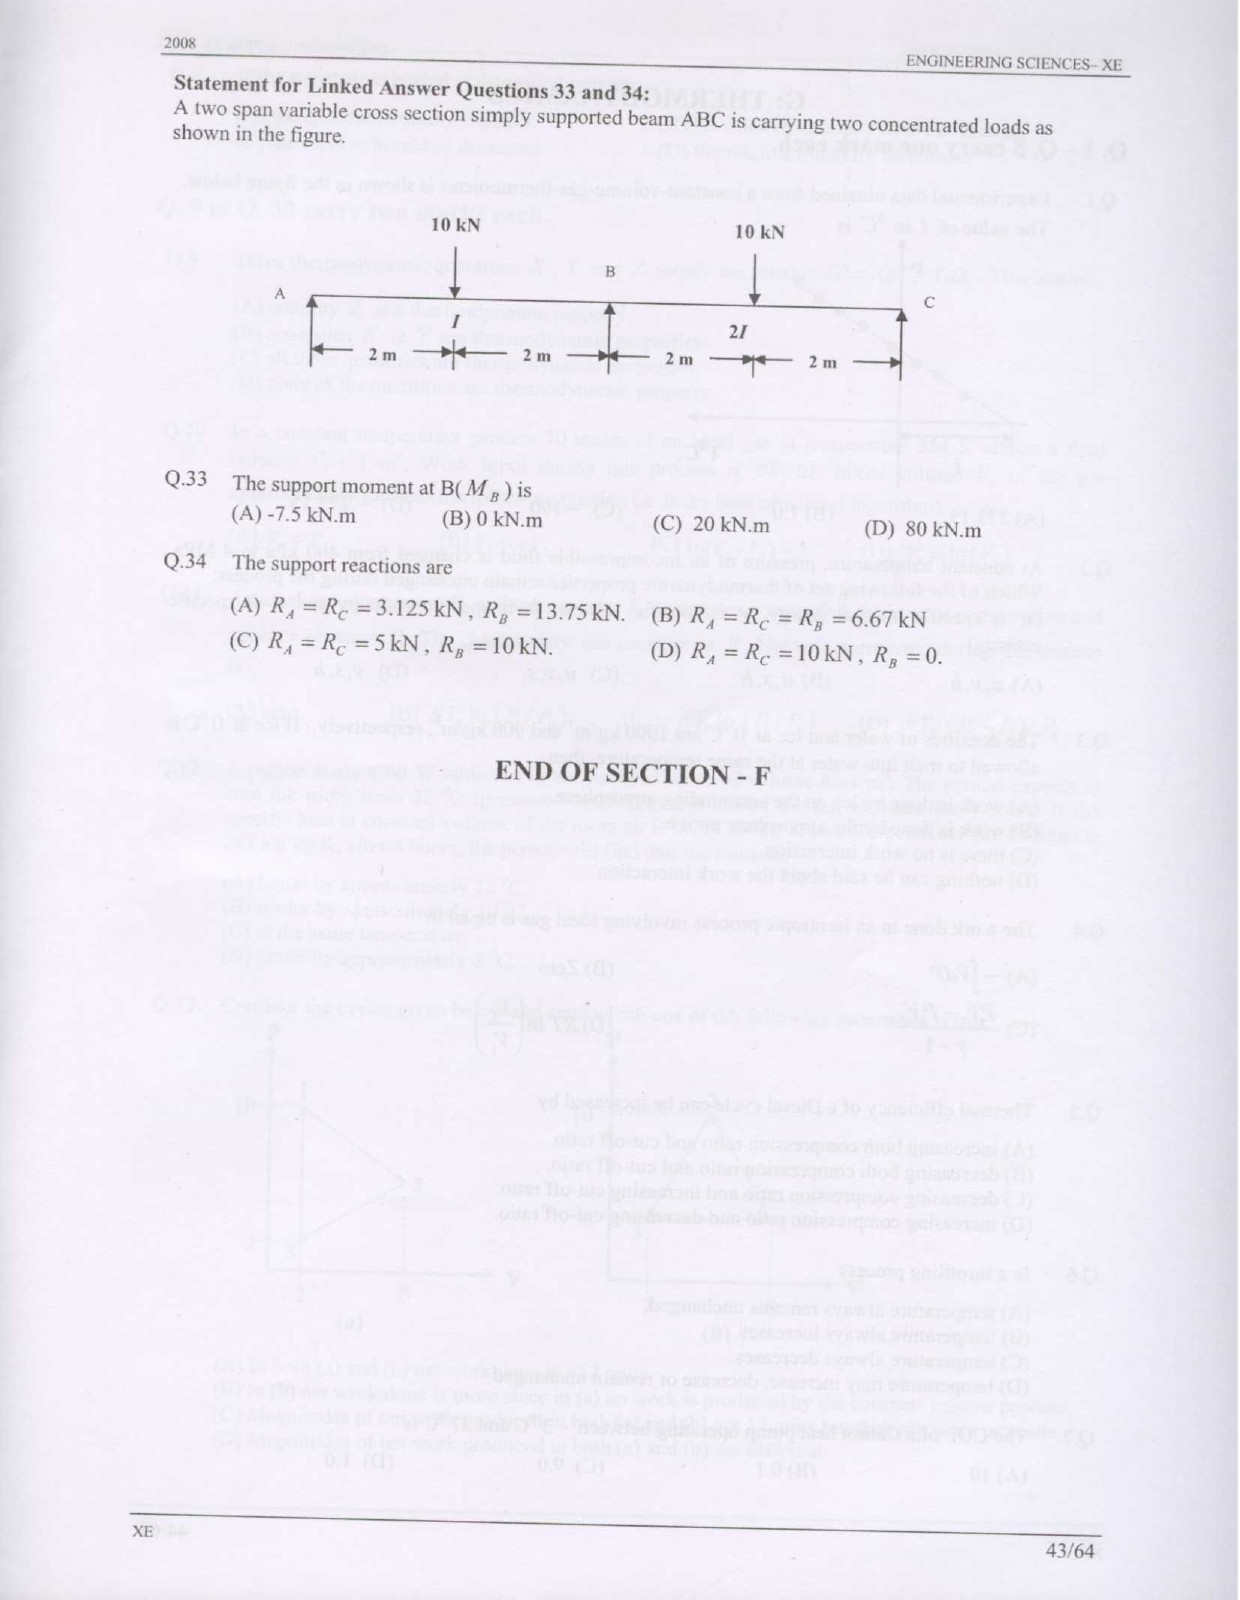 GATE Exam Question Paper 2008 Engineering Sciences 43